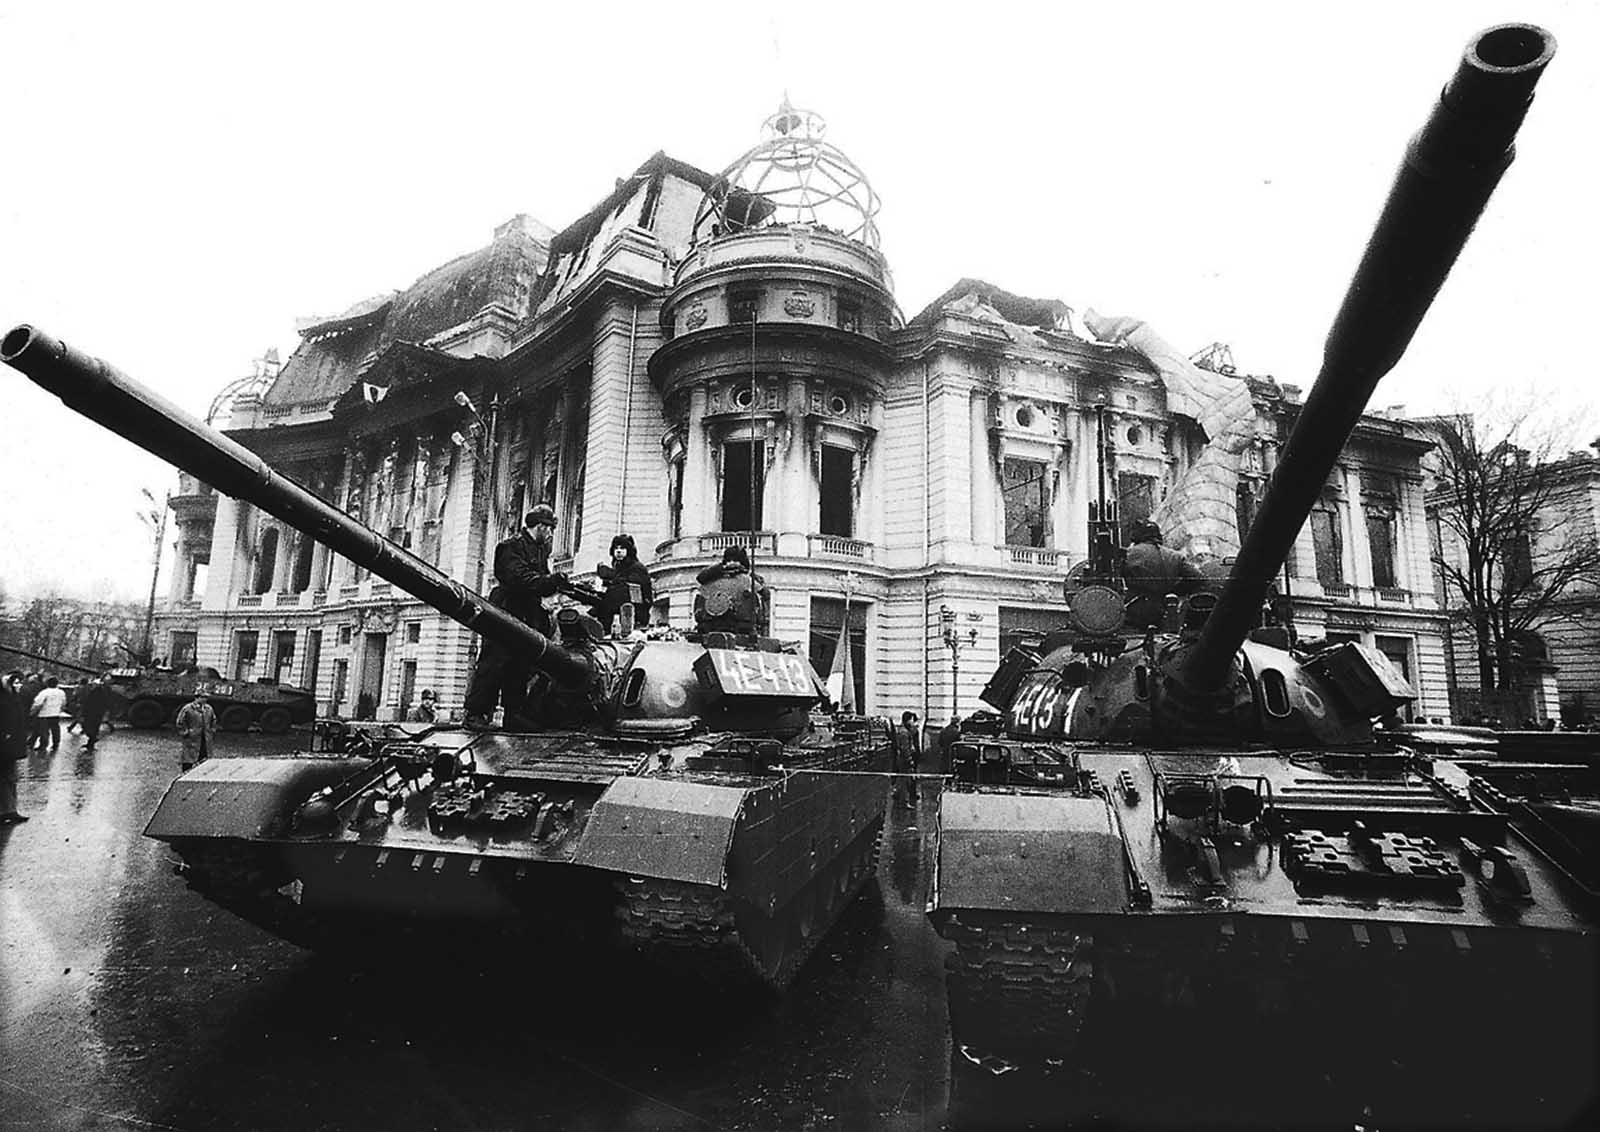 Tanks in front of a burned government building.